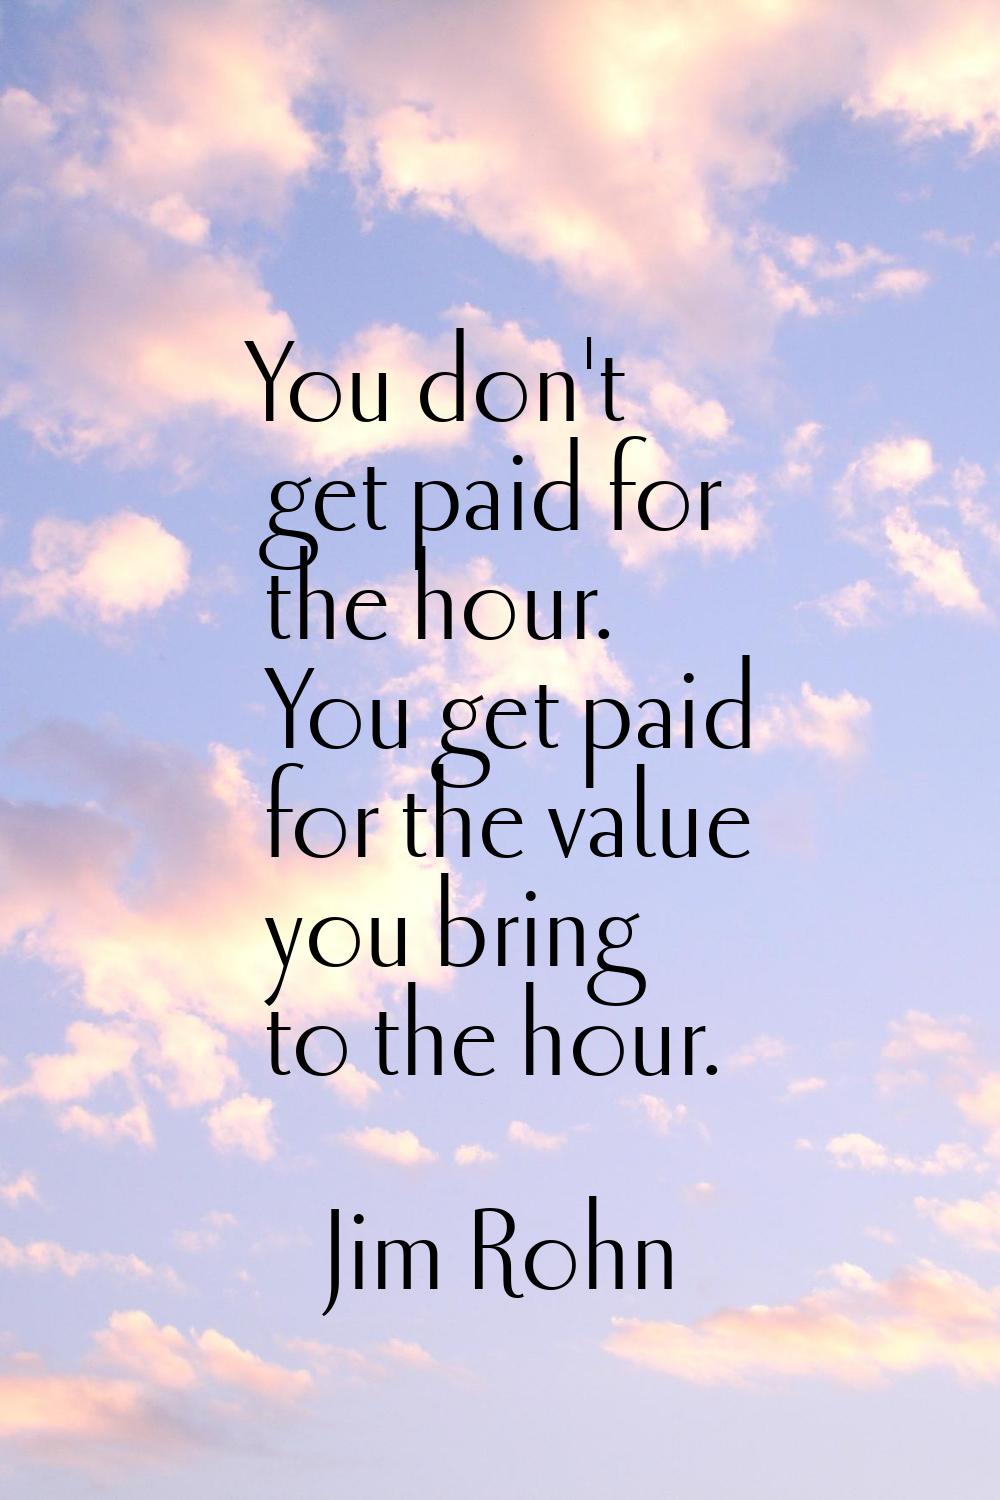 You don't get paid for the hour. You get paid for the value you bring to the hour.